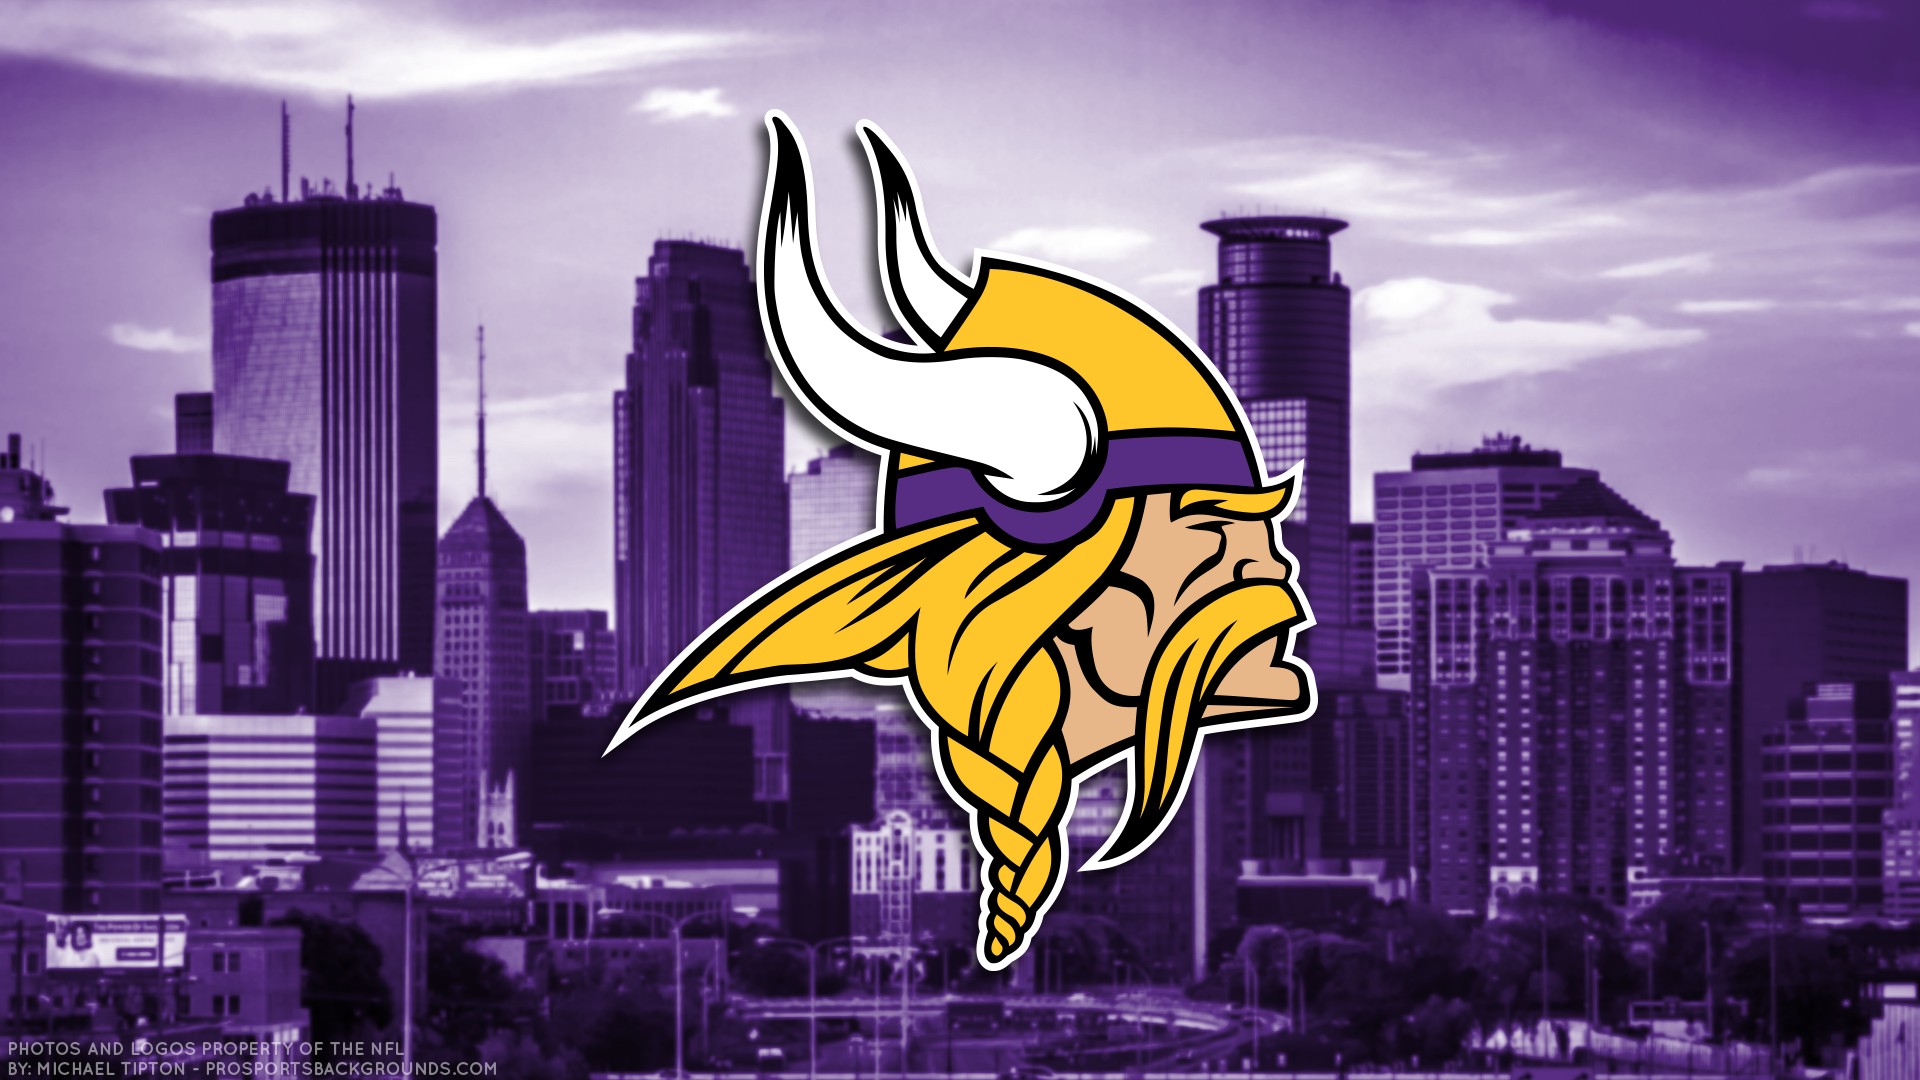 Windows Wallpaper Minnesota Vikings with resolution 1920x1080 pixel. You can make this wallpaper for your Mac or Windows Desktop Background, iPhone, Android or Tablet and another Smartphone device